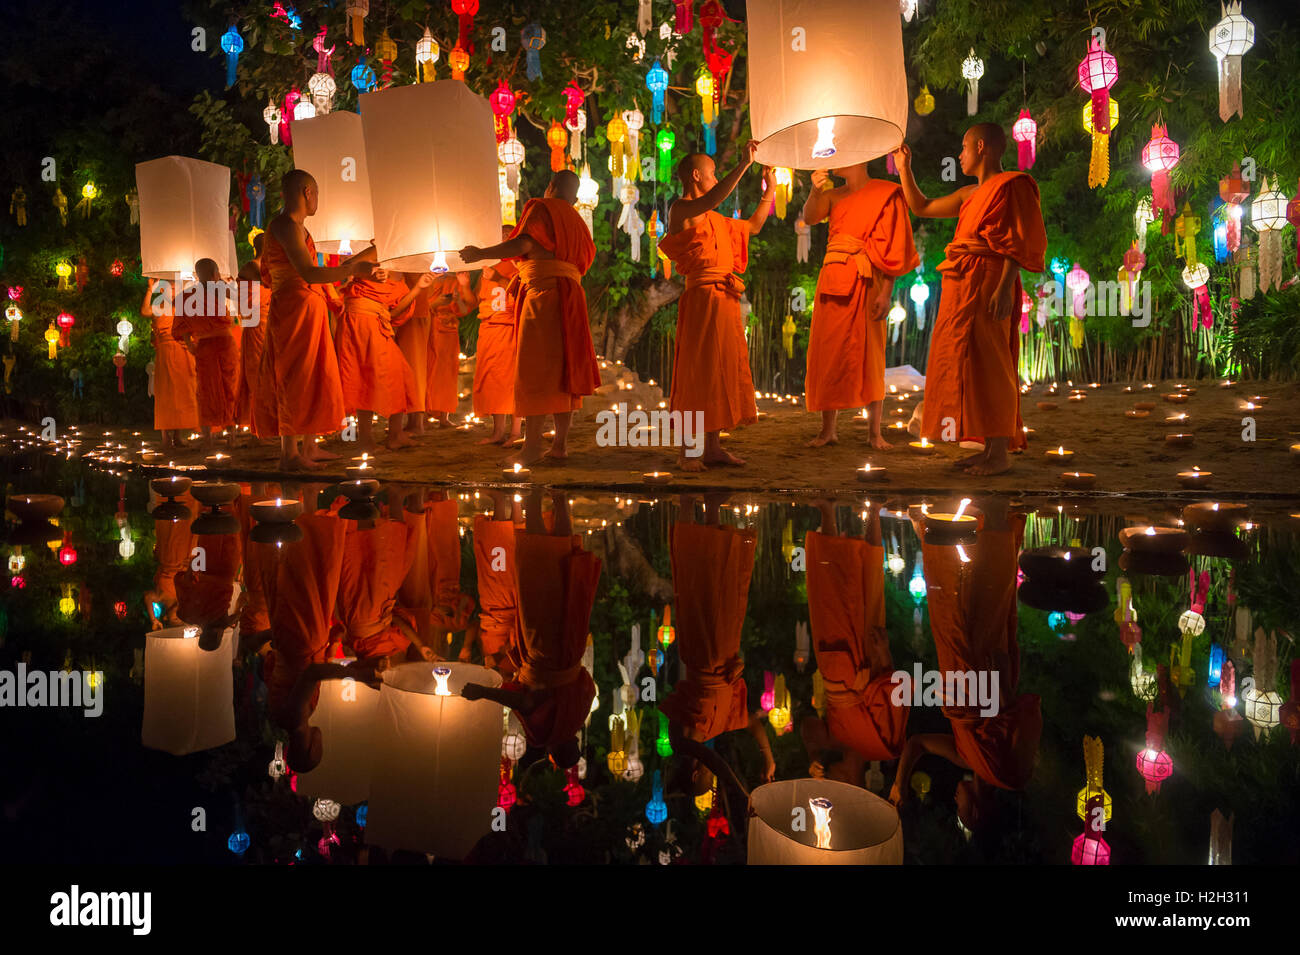 CHIANG MAI, THAILAND - NOVEMBER 07, 2014: Groups of Buddhist monks launch sky lanterns at the Yee Peng festival of lights. Stock Photo